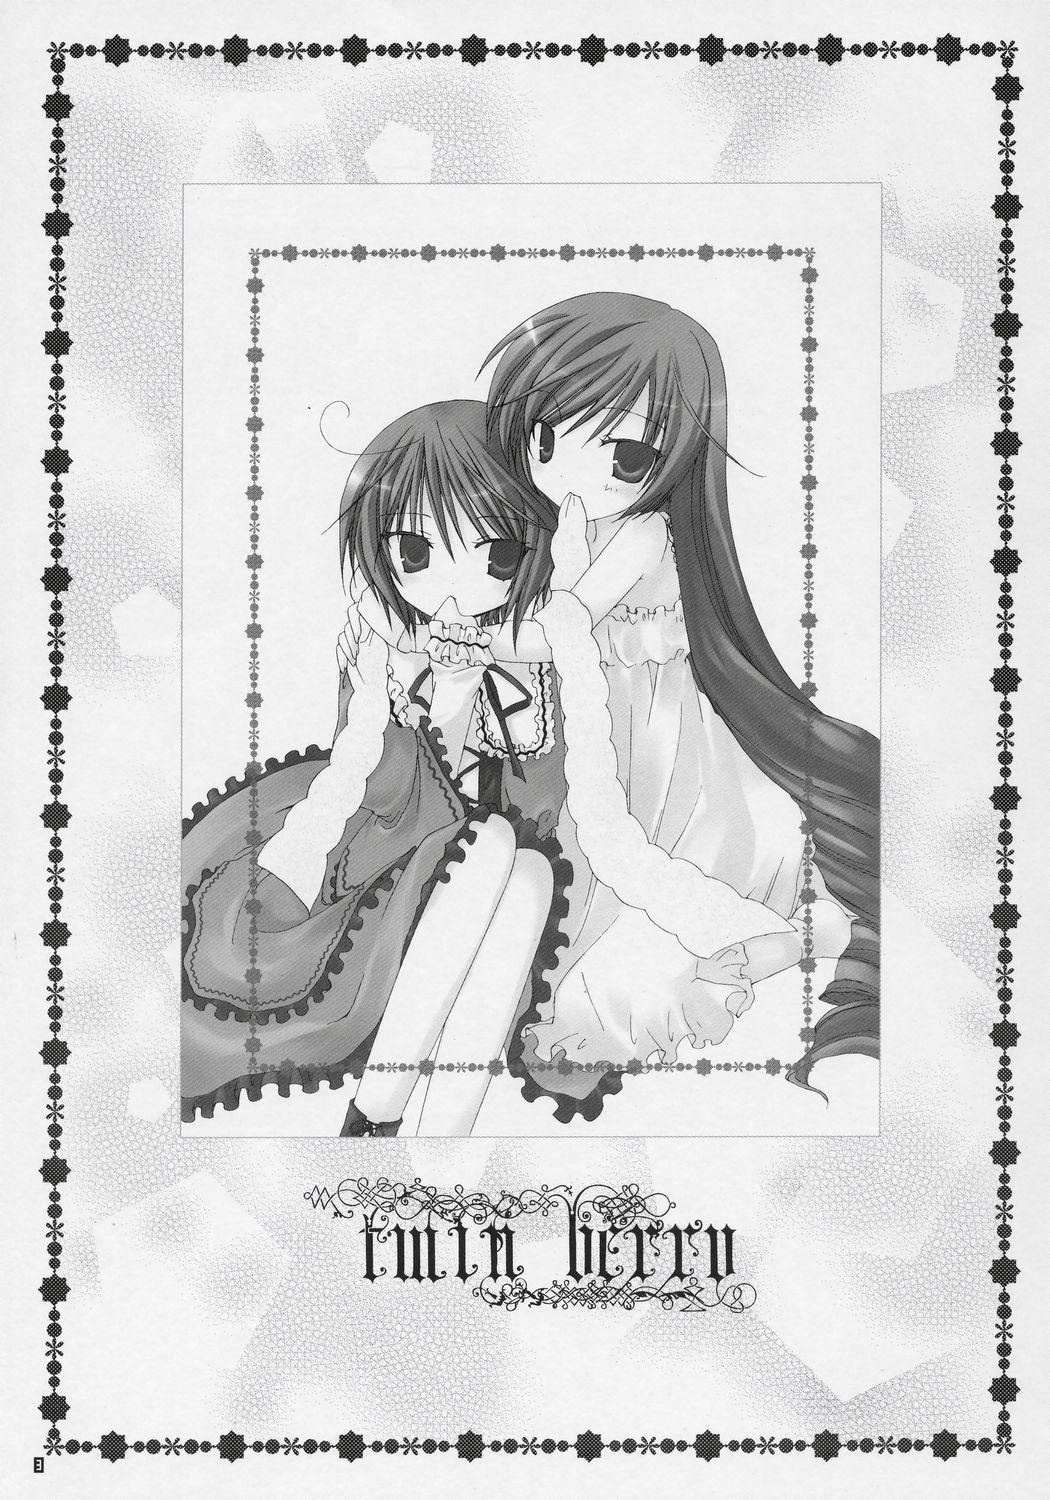 Couple TwinBerry - Rozen maiden Linda - Page 2